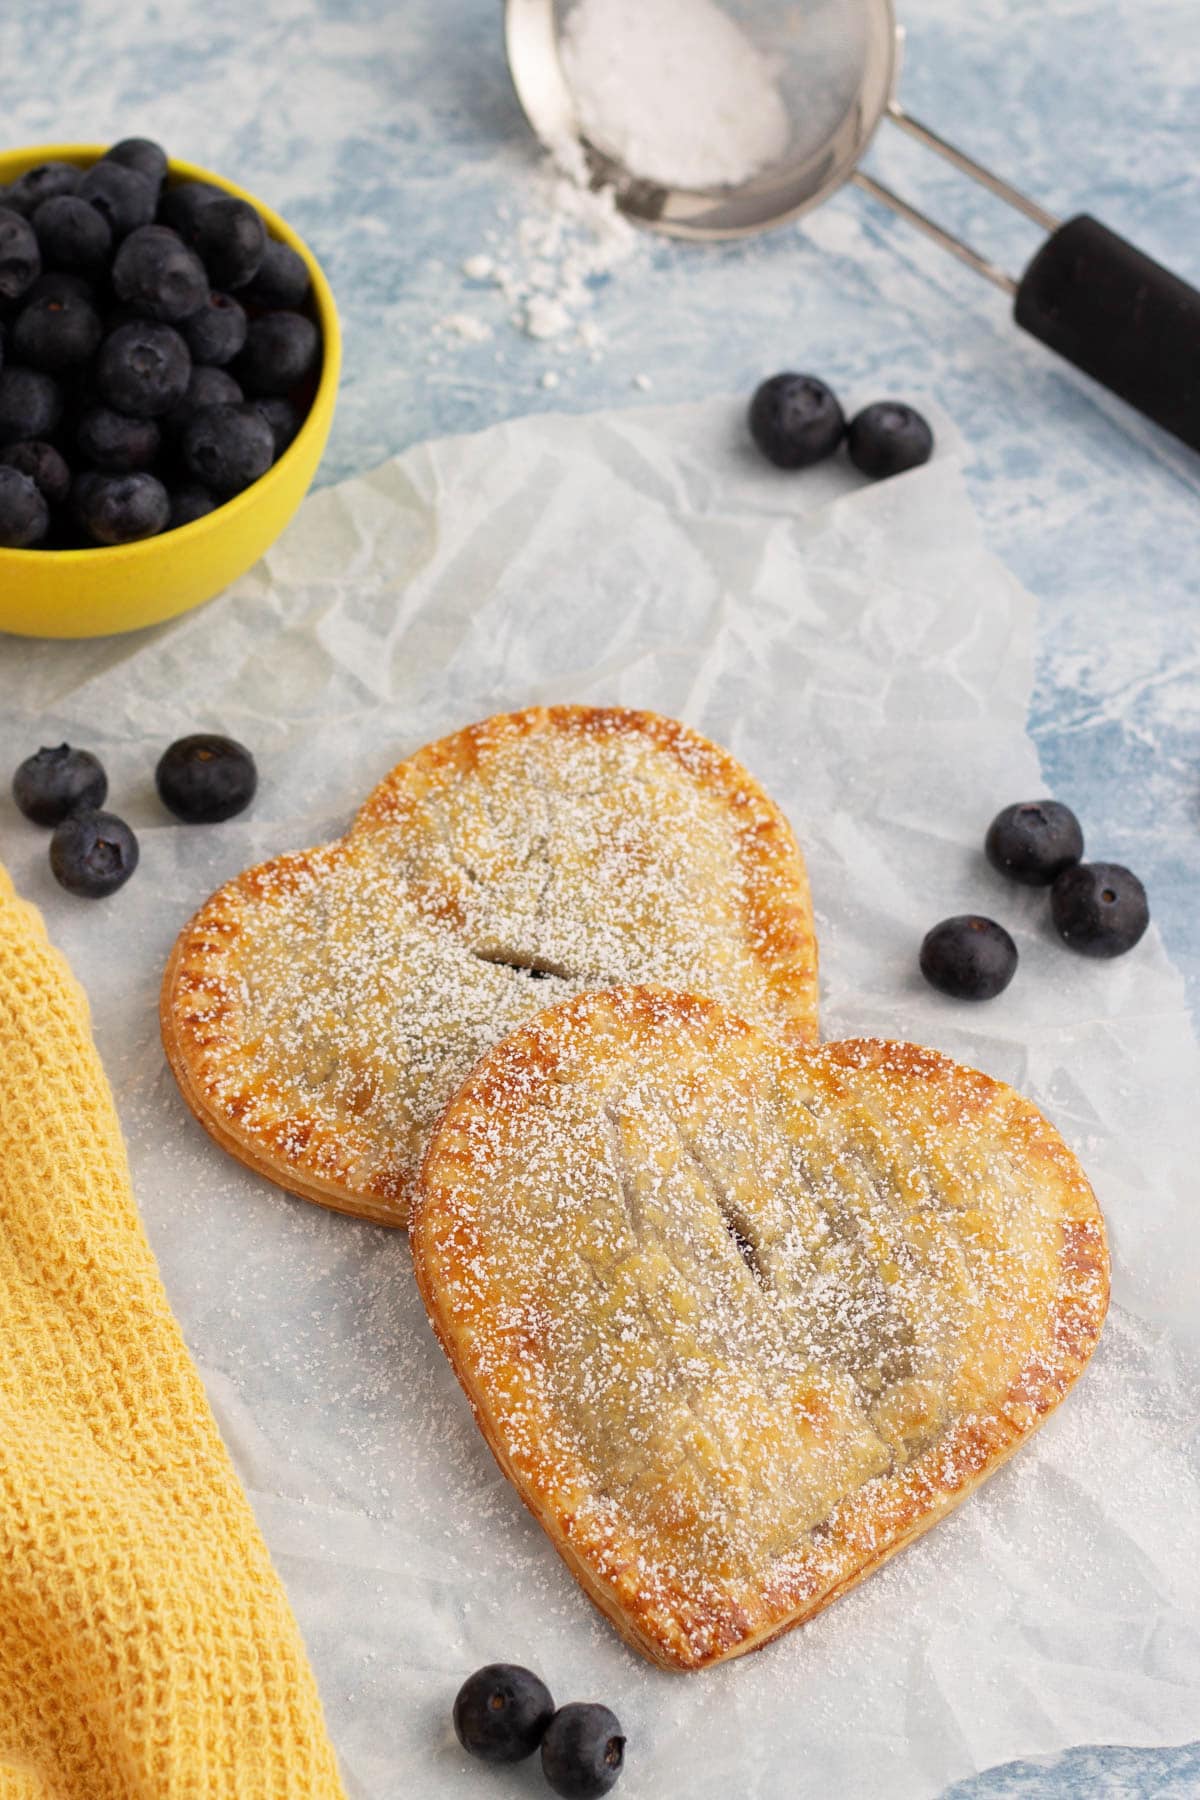 Blueberry hand pies on piece of parchment paper